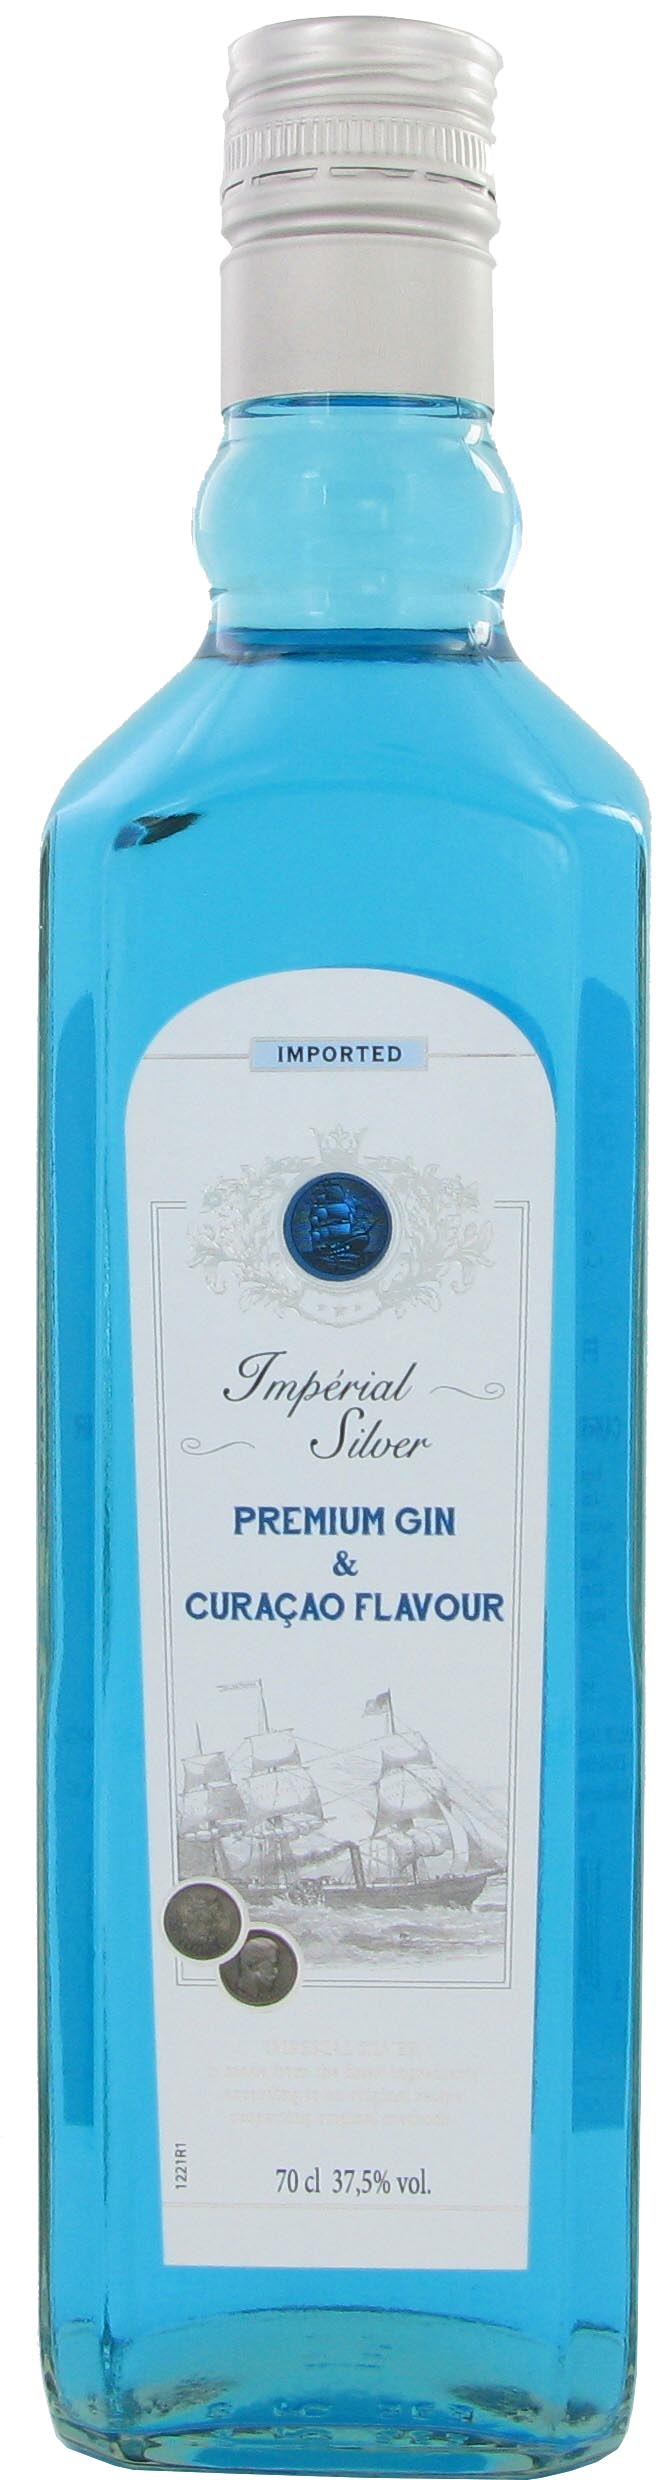 GIN IMPERIAL SILVER CURACAO FLAVOUR